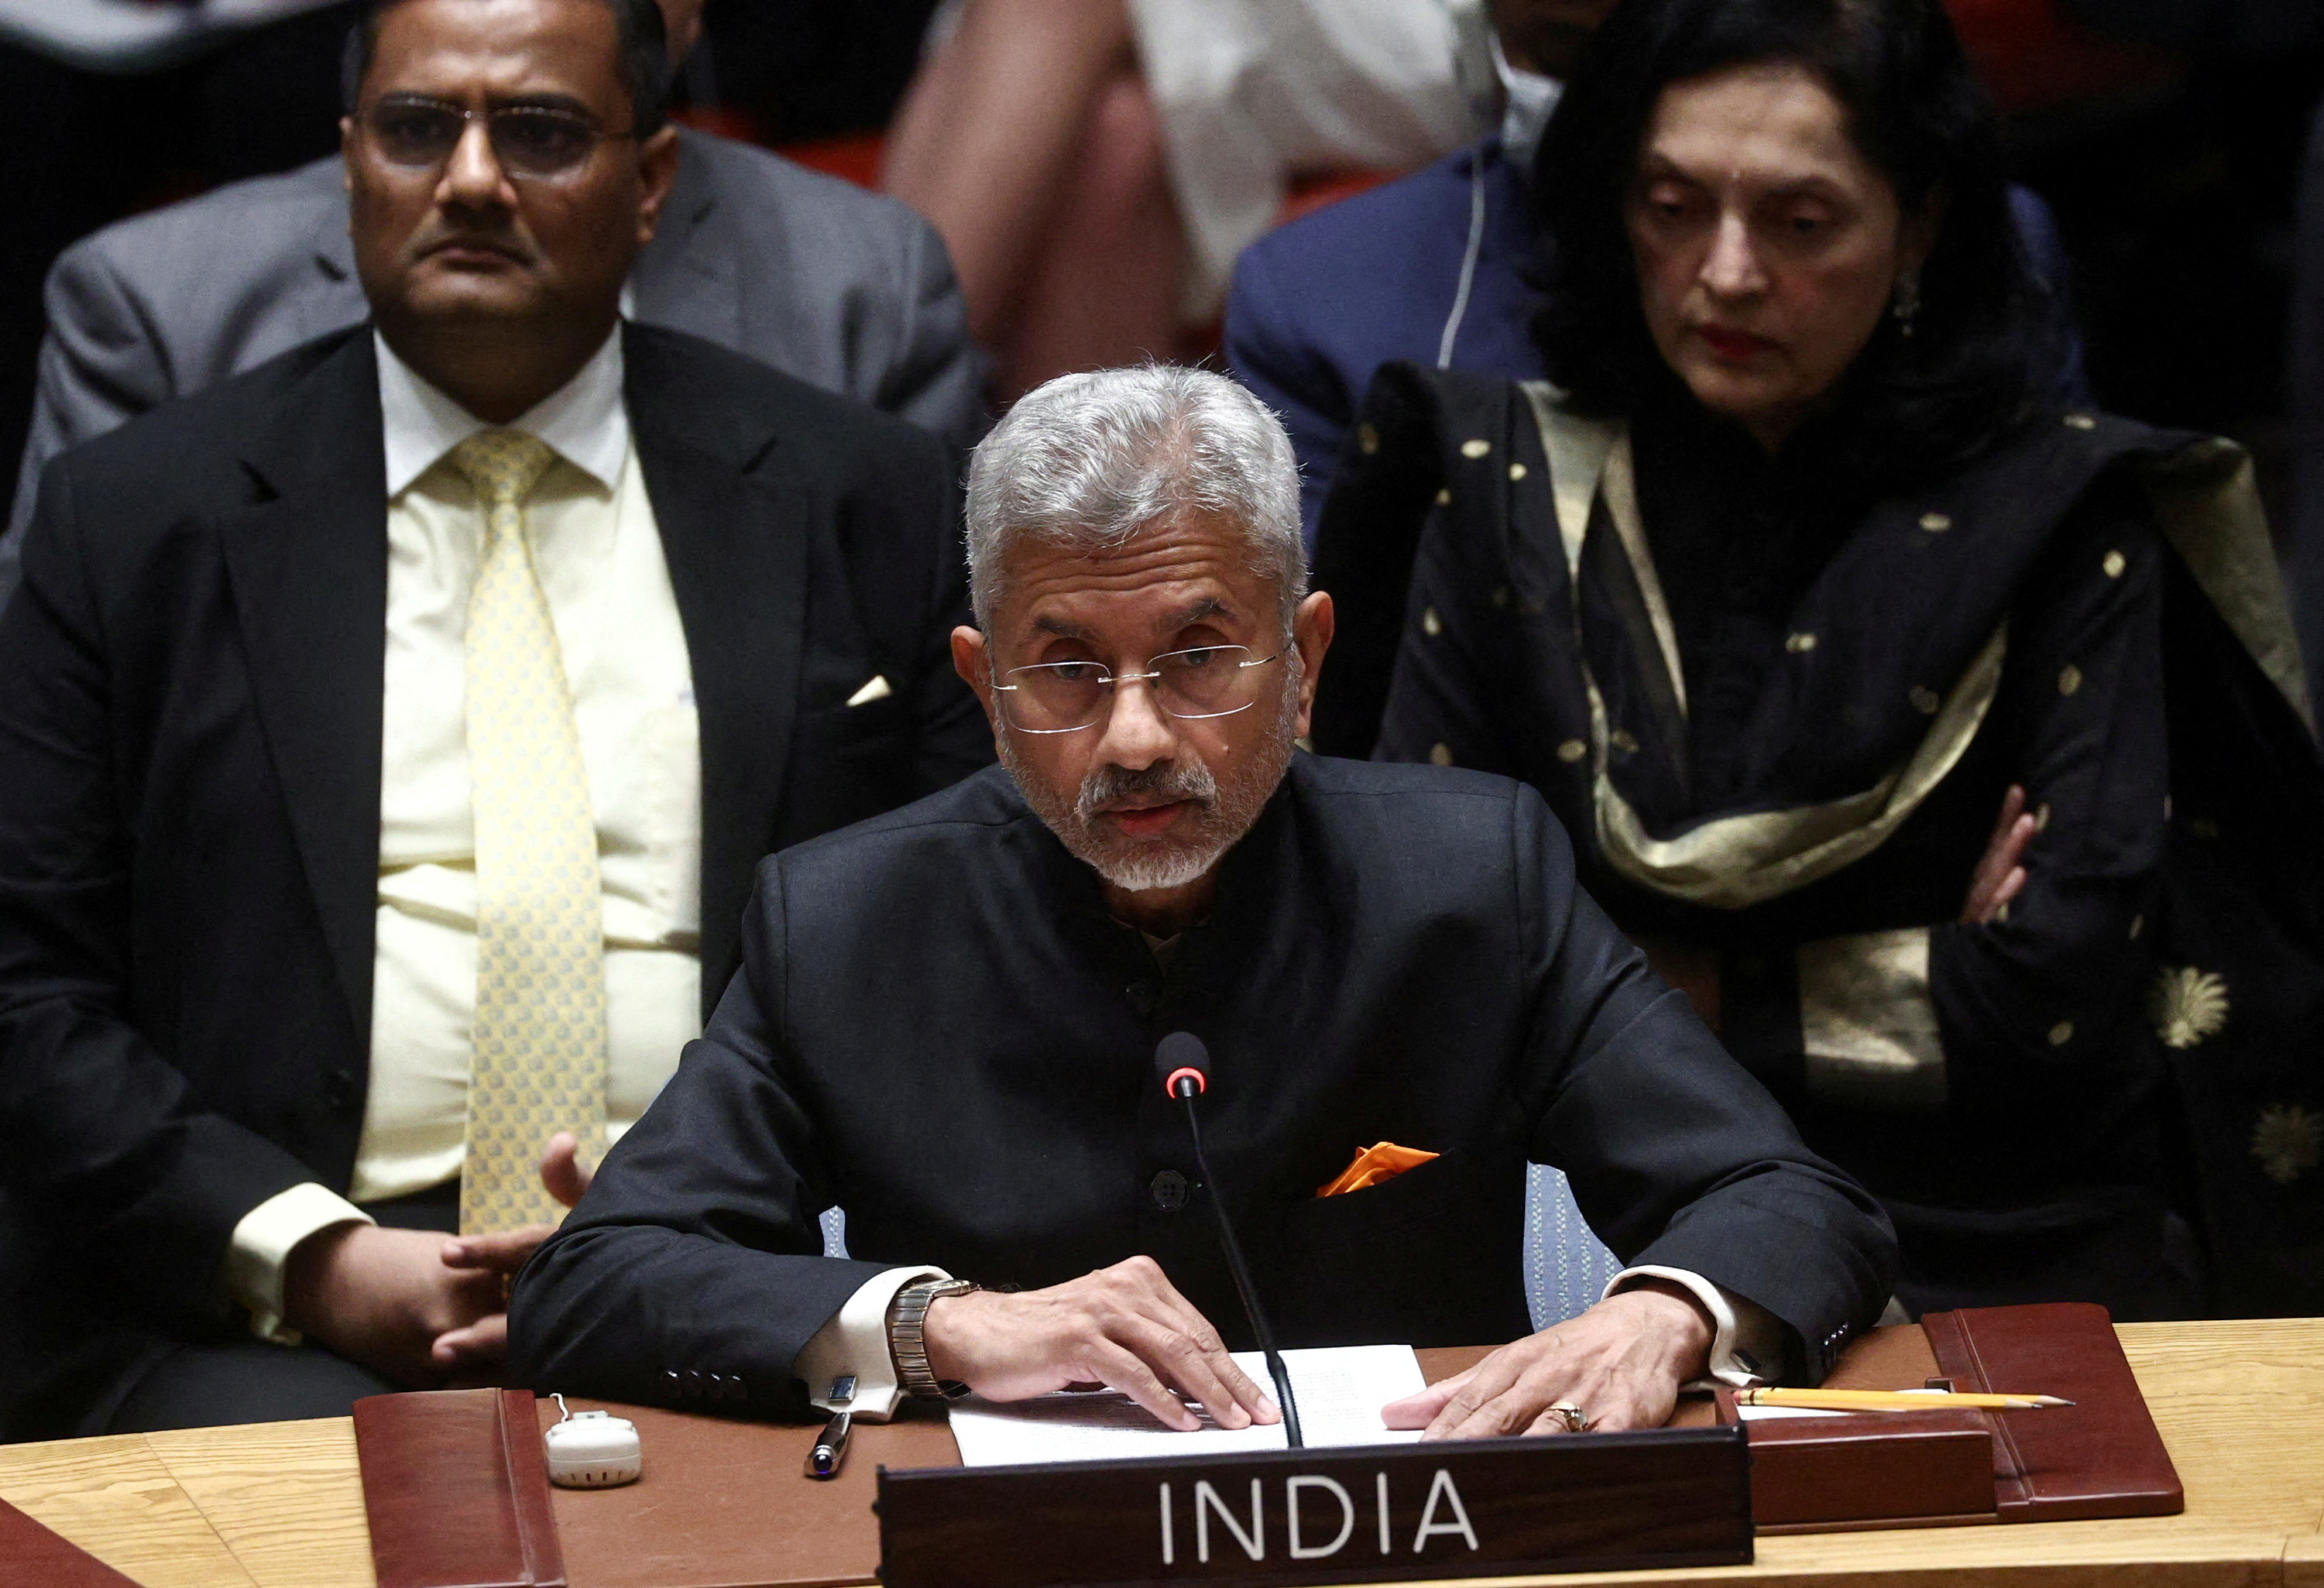 Indian External Affairs Minister Dr. S. Jaishankar attends a meeting of the United Nations Security Council